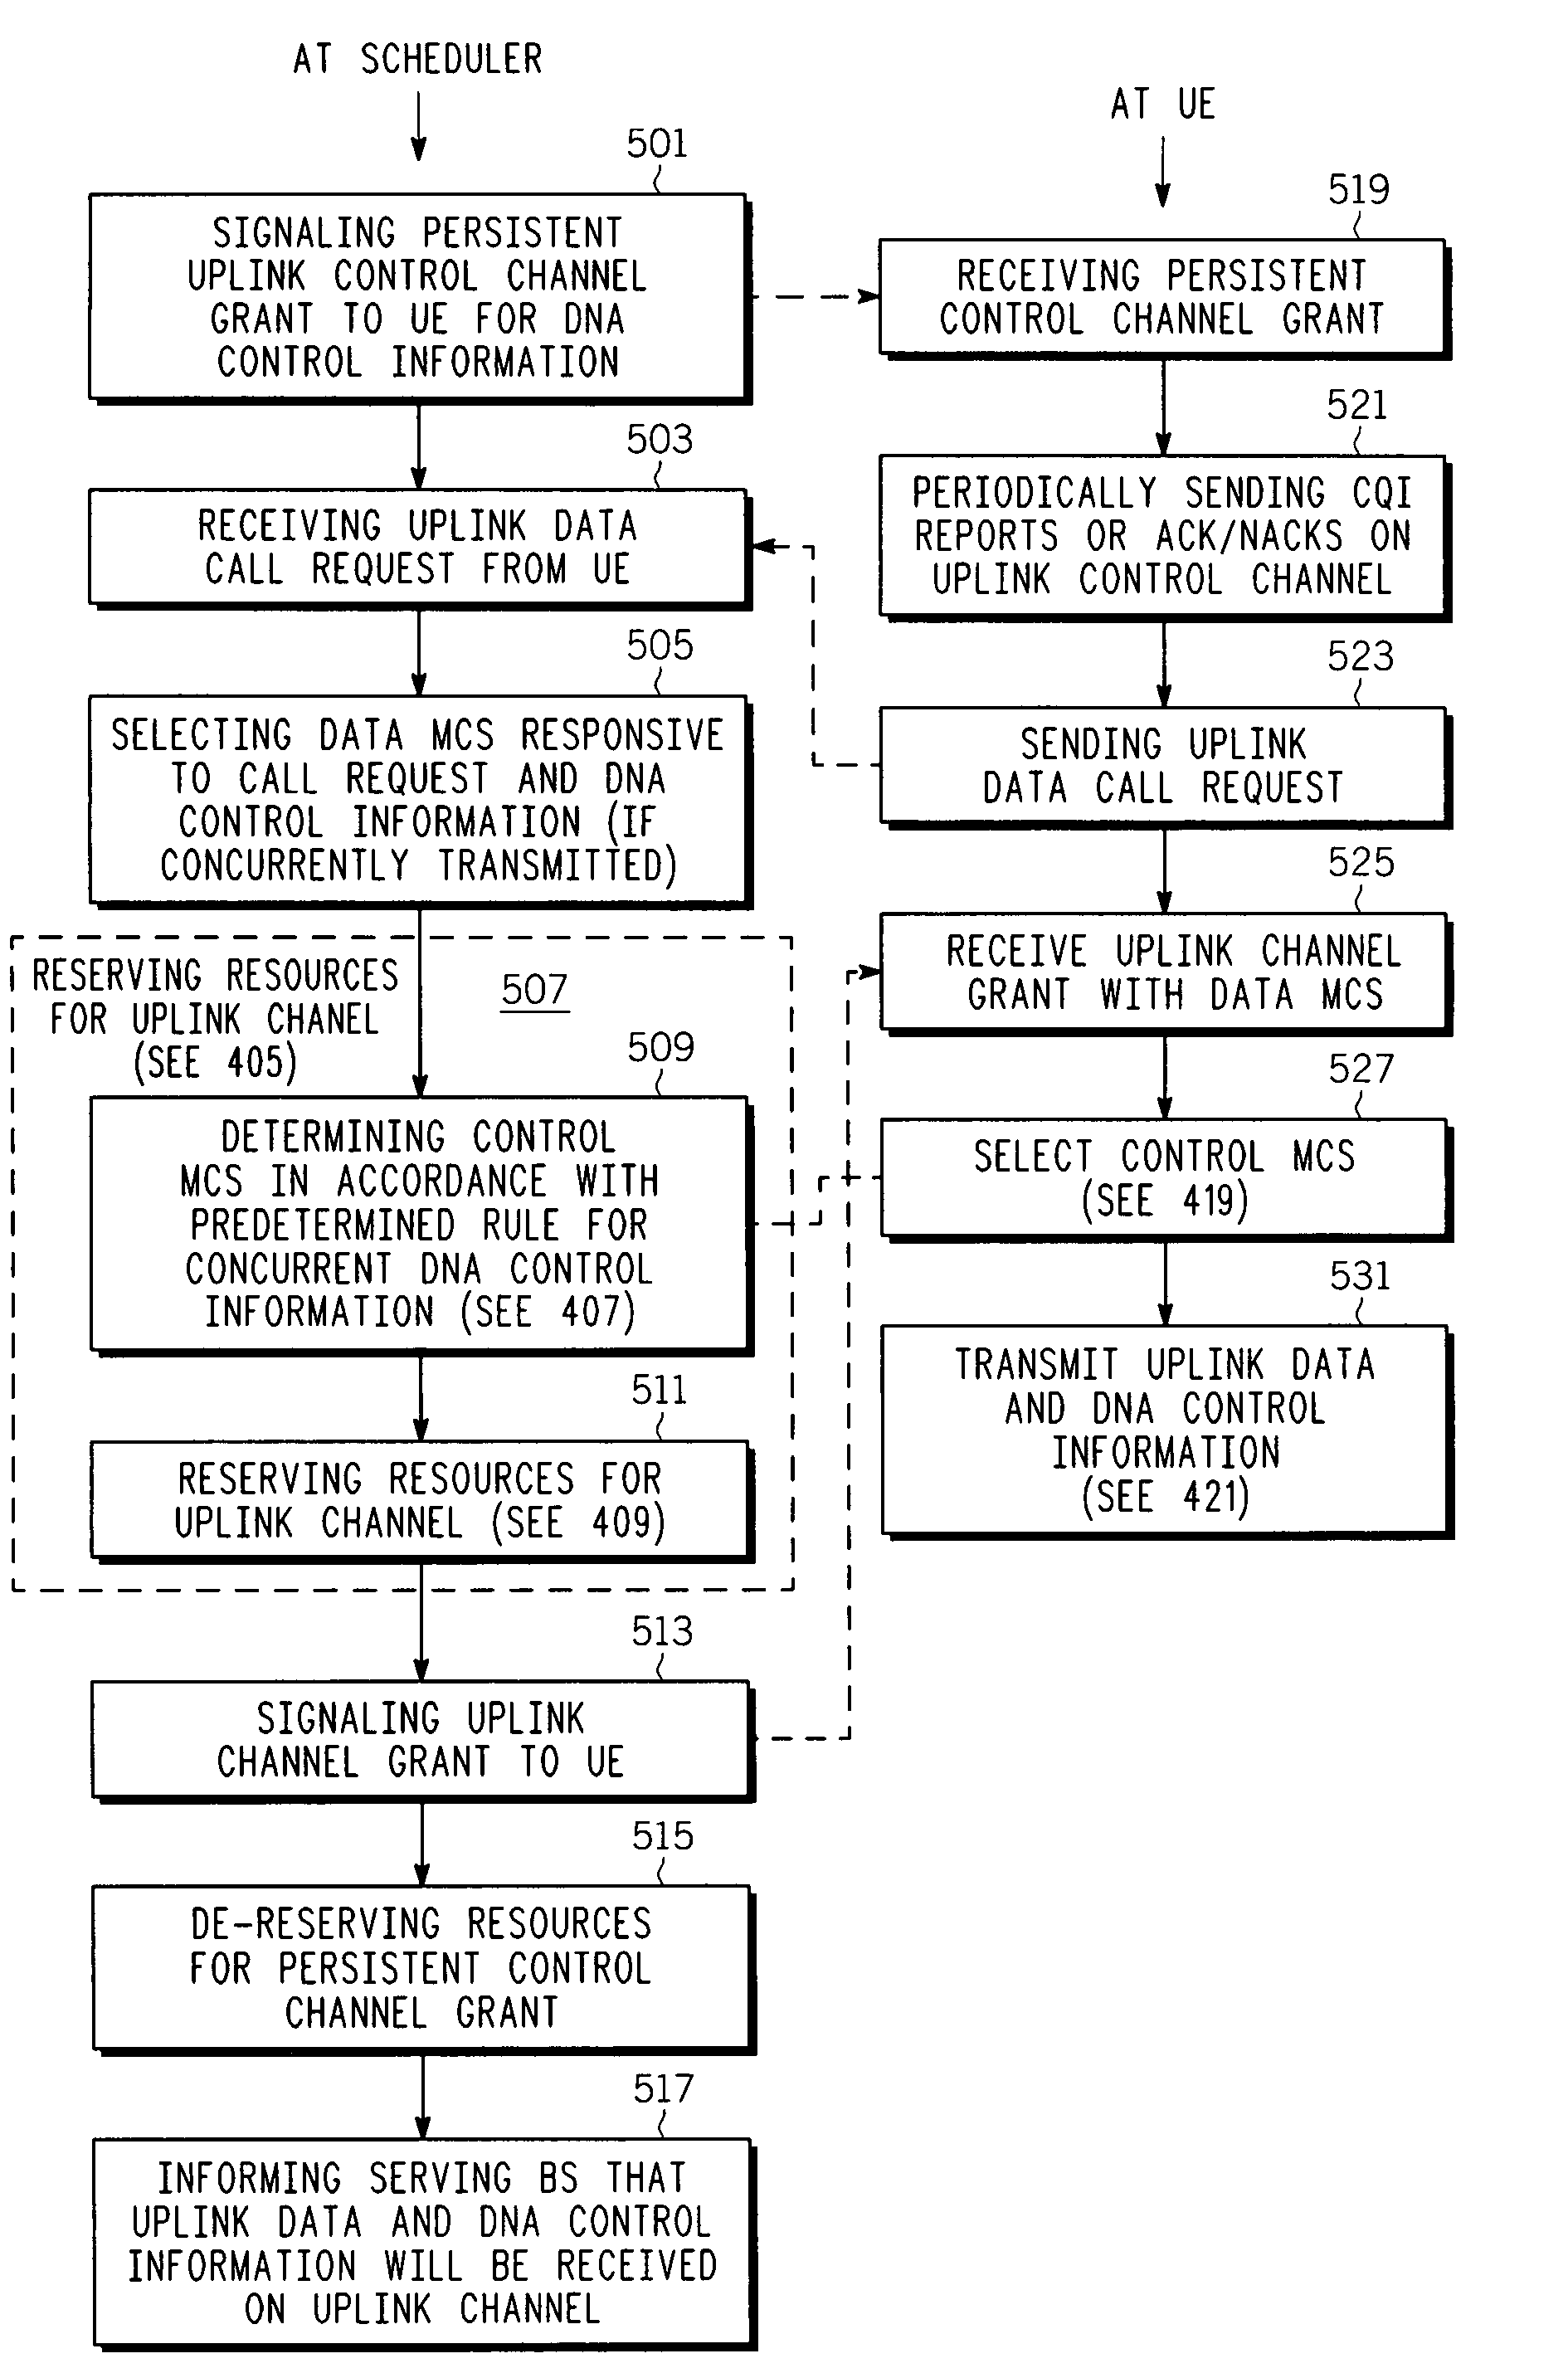 Uplink control channel allocation